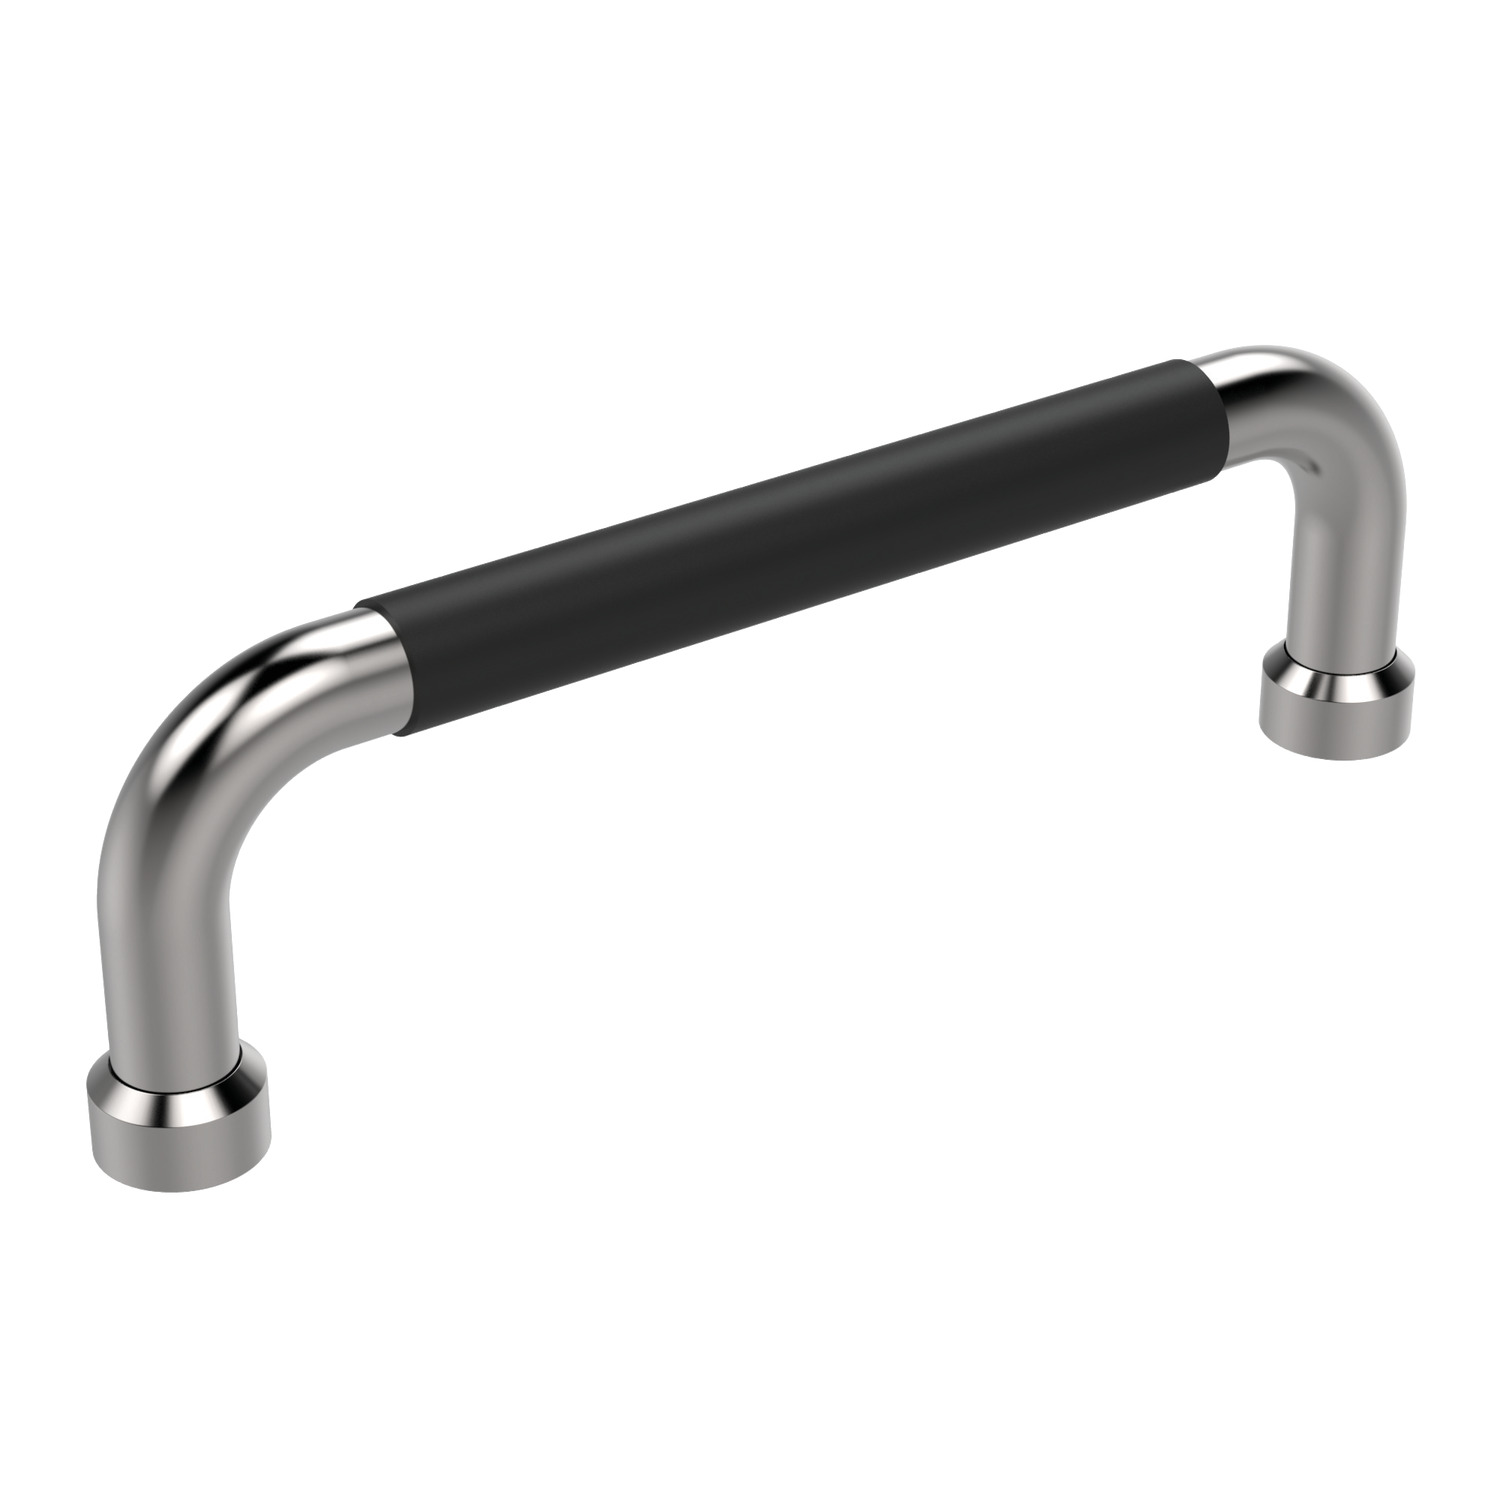 78740.W0115 Pull Handles with Plastic Cover - Steel. 115